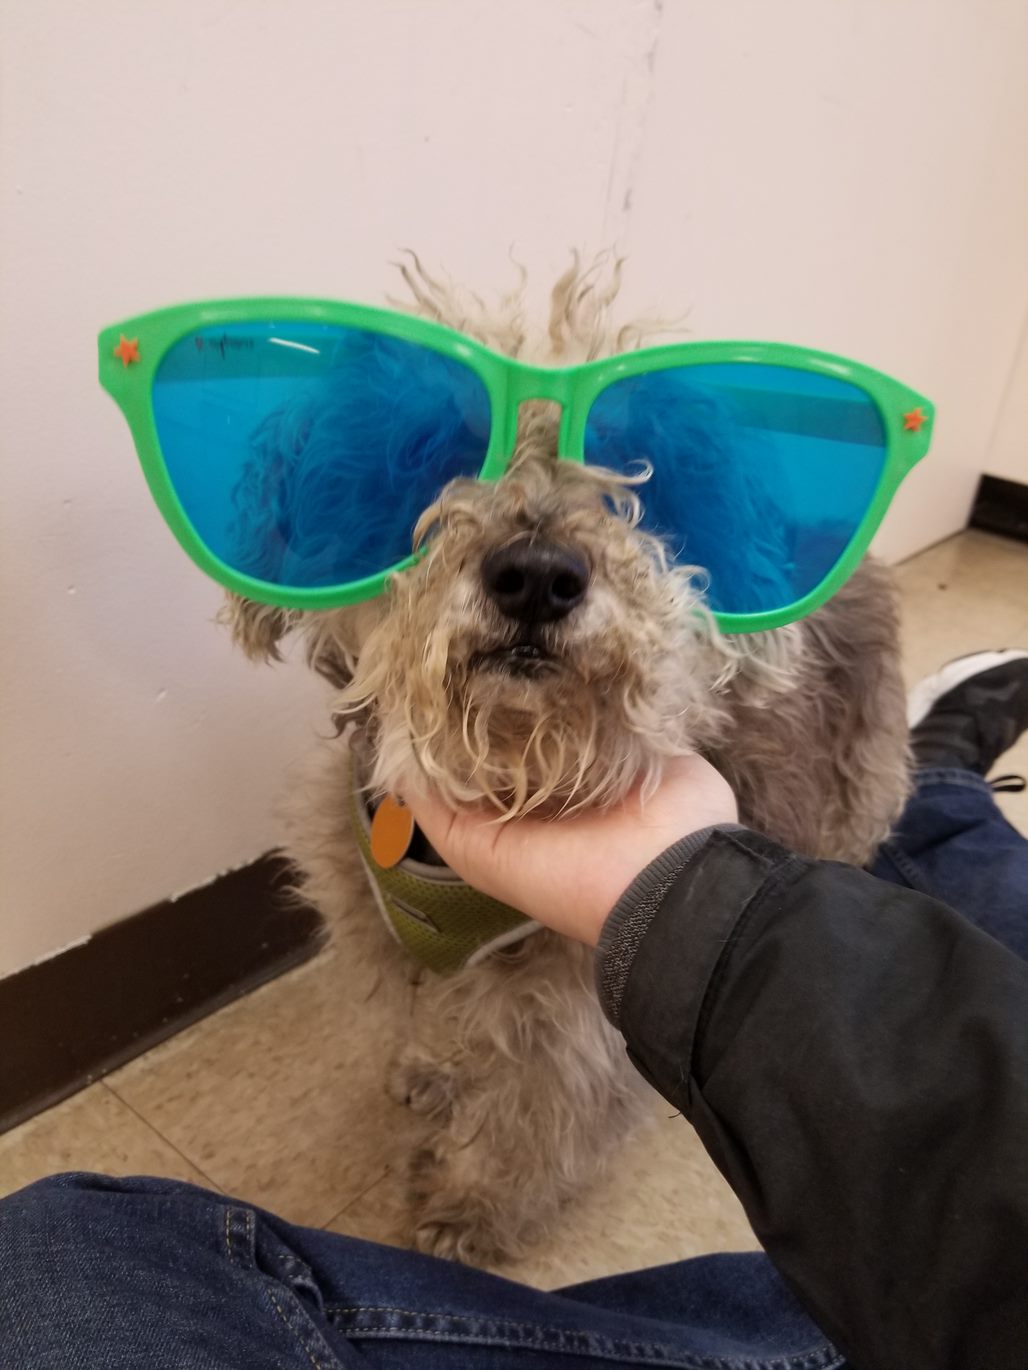 Small gray dog with green sunglasses on